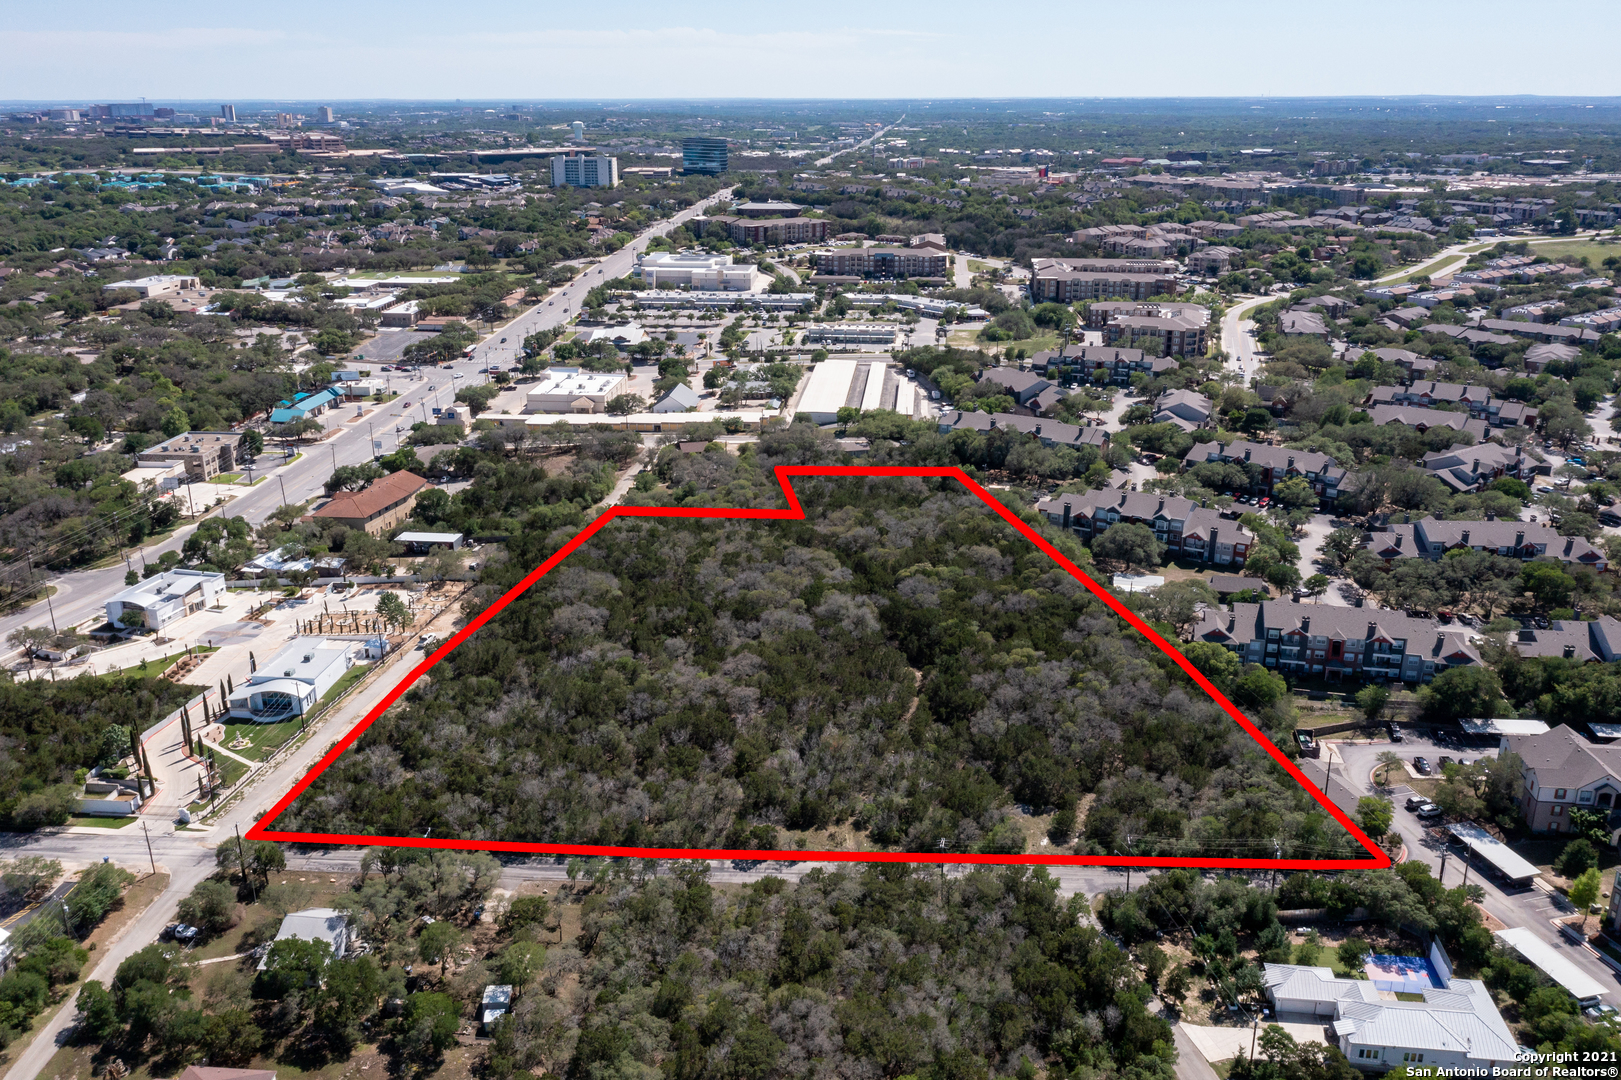 Total land 5.96 Acres AS-IS. Total lots 16. Lots are located one block from Huebner Rd and Moonlight way. The property is surrounding by Medical Clinics, shopping centers and 3 miles from the Medical Center, and 5 miles from UTSA, The Rim, and La Cantera.